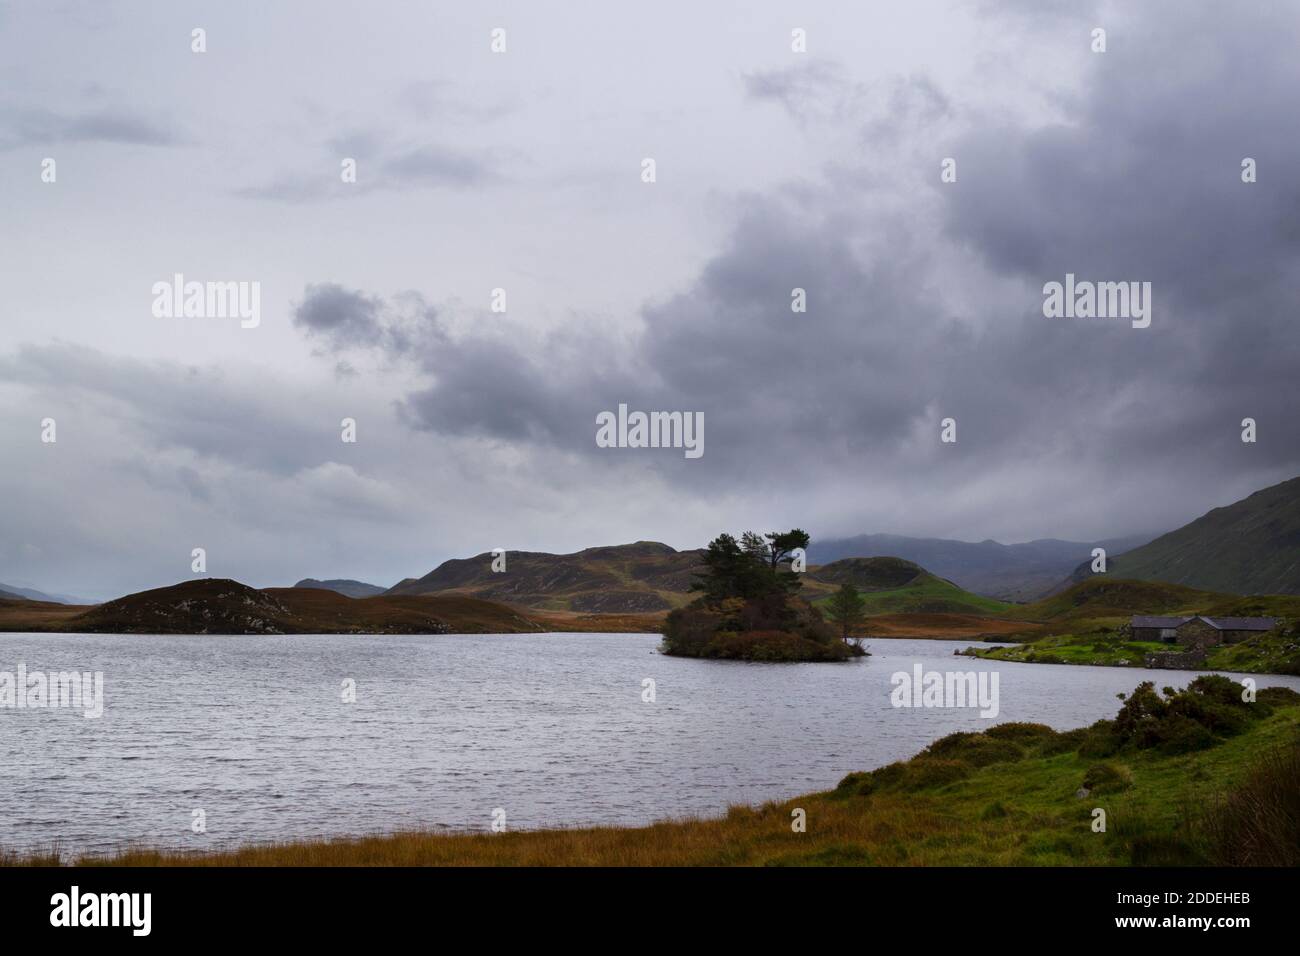 Autumn, Lake Cregennan in Gwynedd, Wales, with the hills behind in the clouds and some stone farm buildings Stock Photo